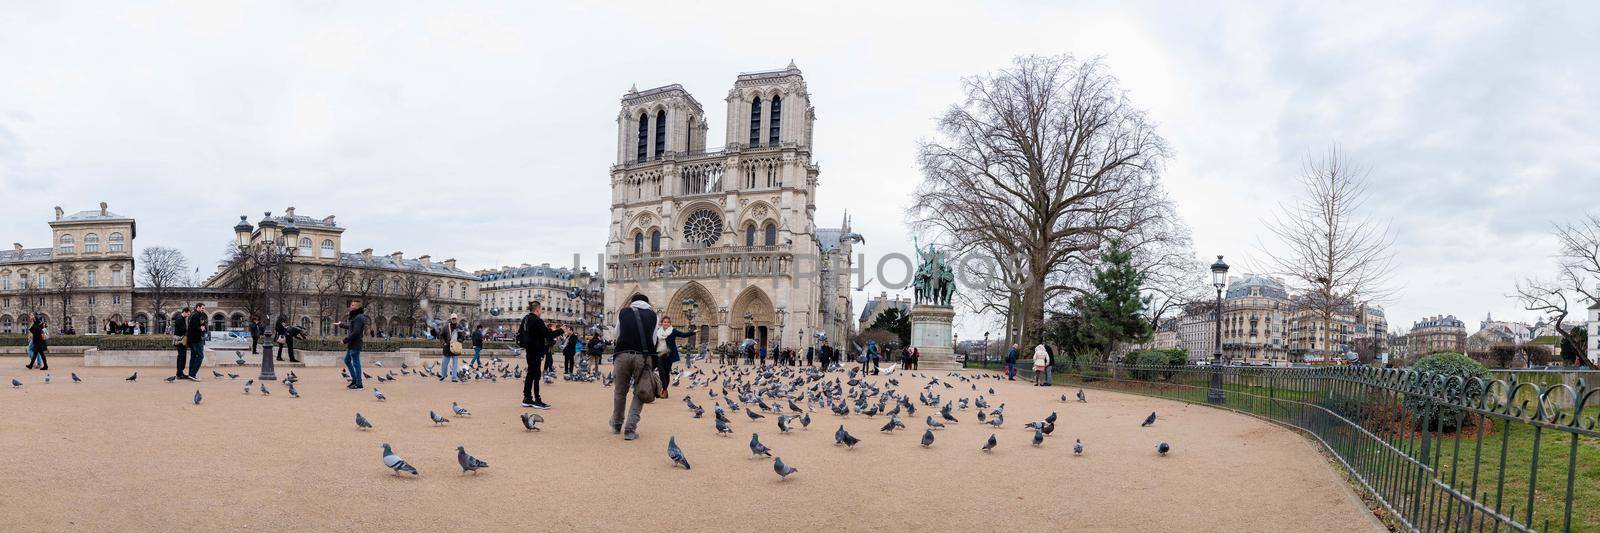 Wide angle view of doves and unidentified tourists in front of the Notre Dame de Paris. It is among the largest and most well-known church buildings in the world. by jyurinko